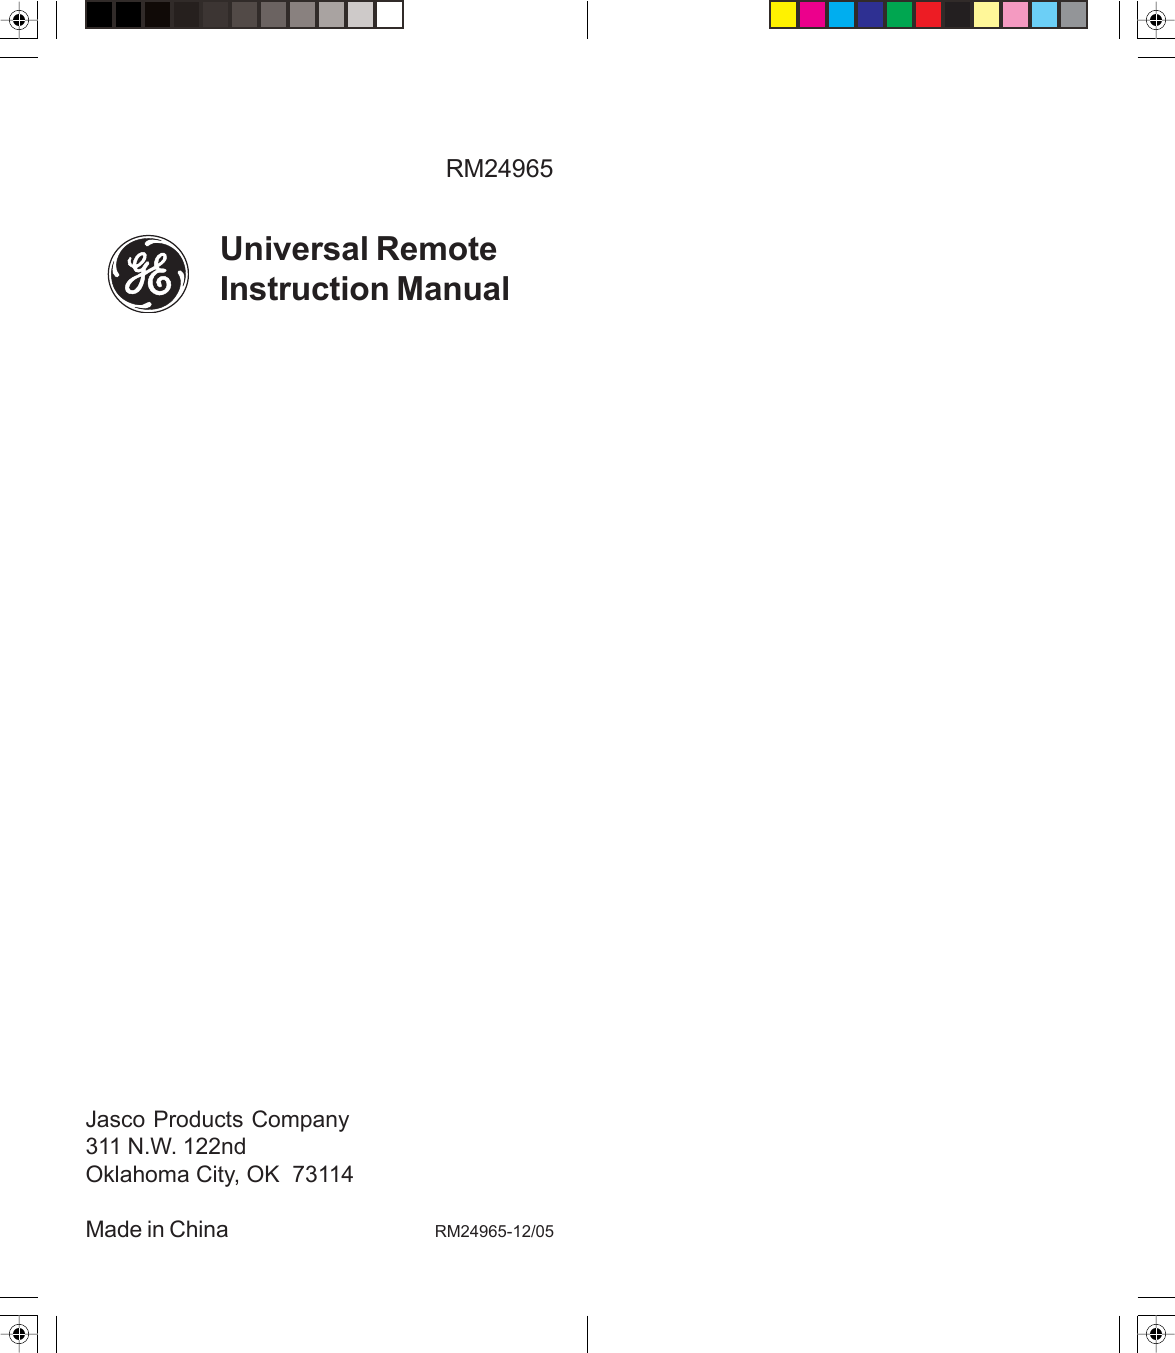 Page 9 of 9 - Ge-Appliances Ge-24965-Ge-Universal-Remote-Owners-Manual RM24965-OM .pmd